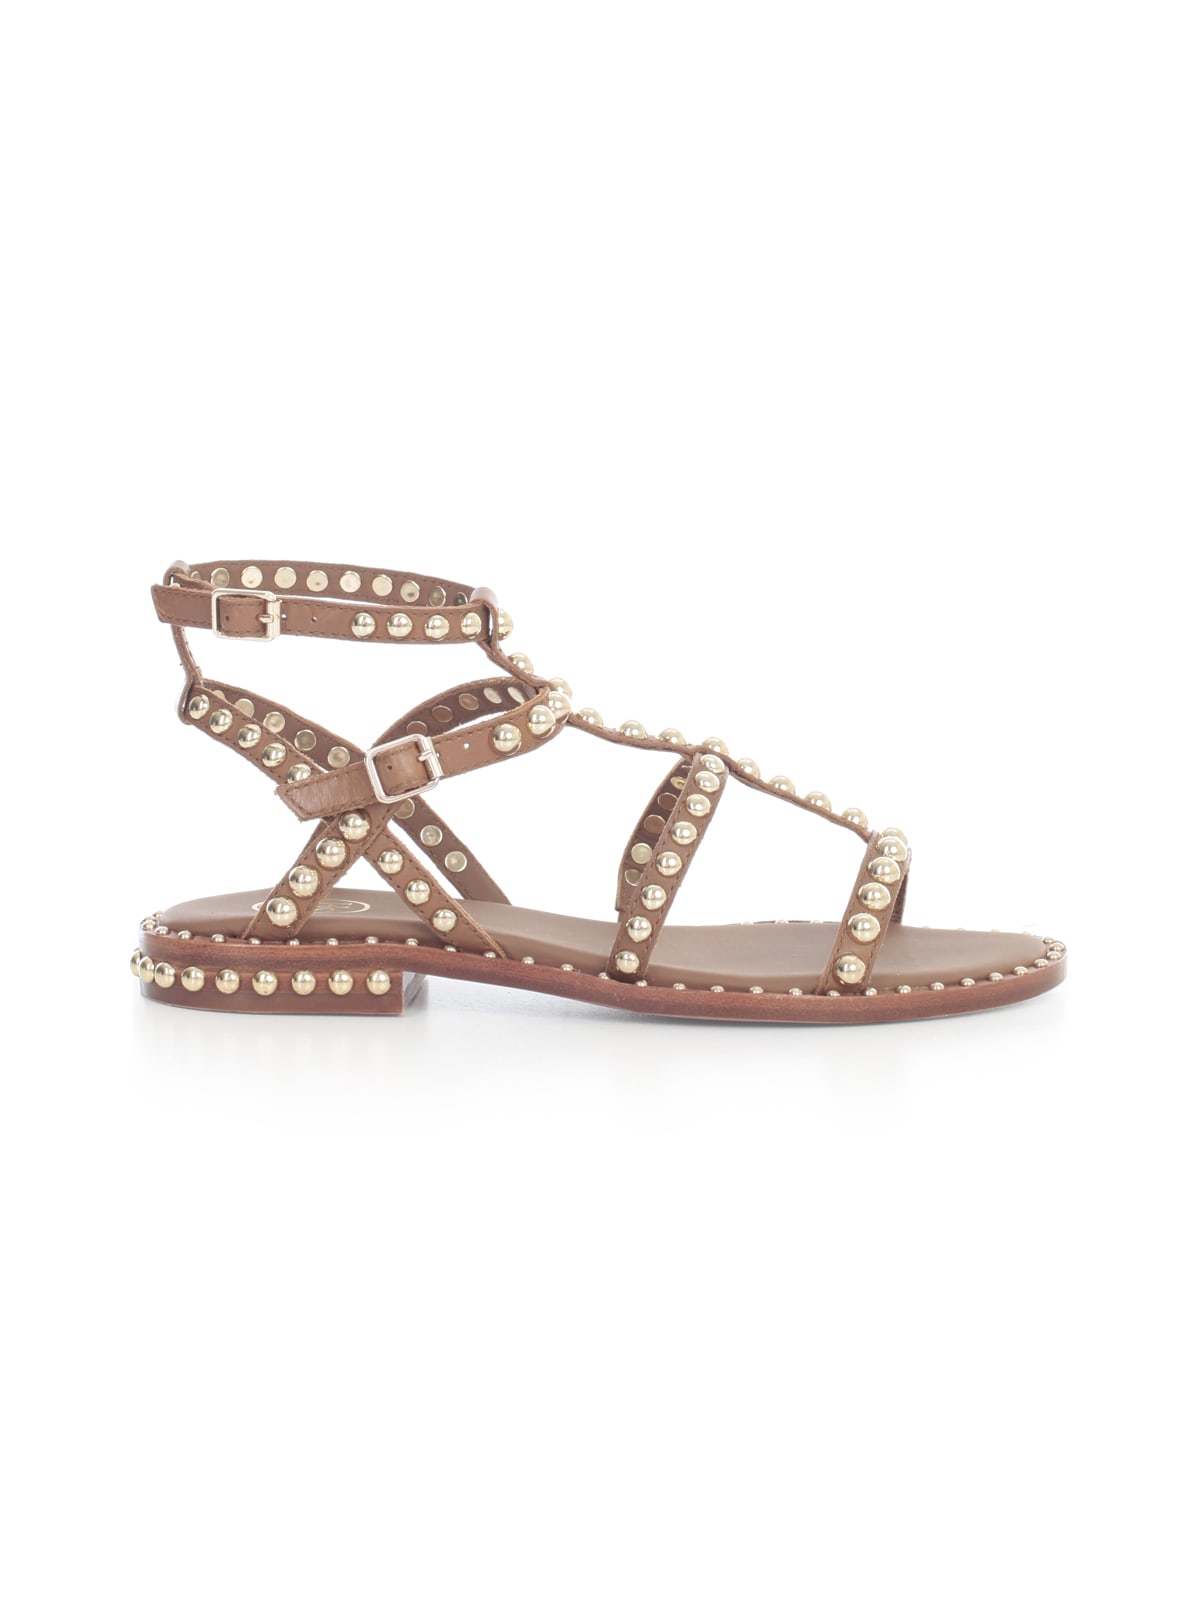 Ash Sandals W/ Studs And Two Buckle